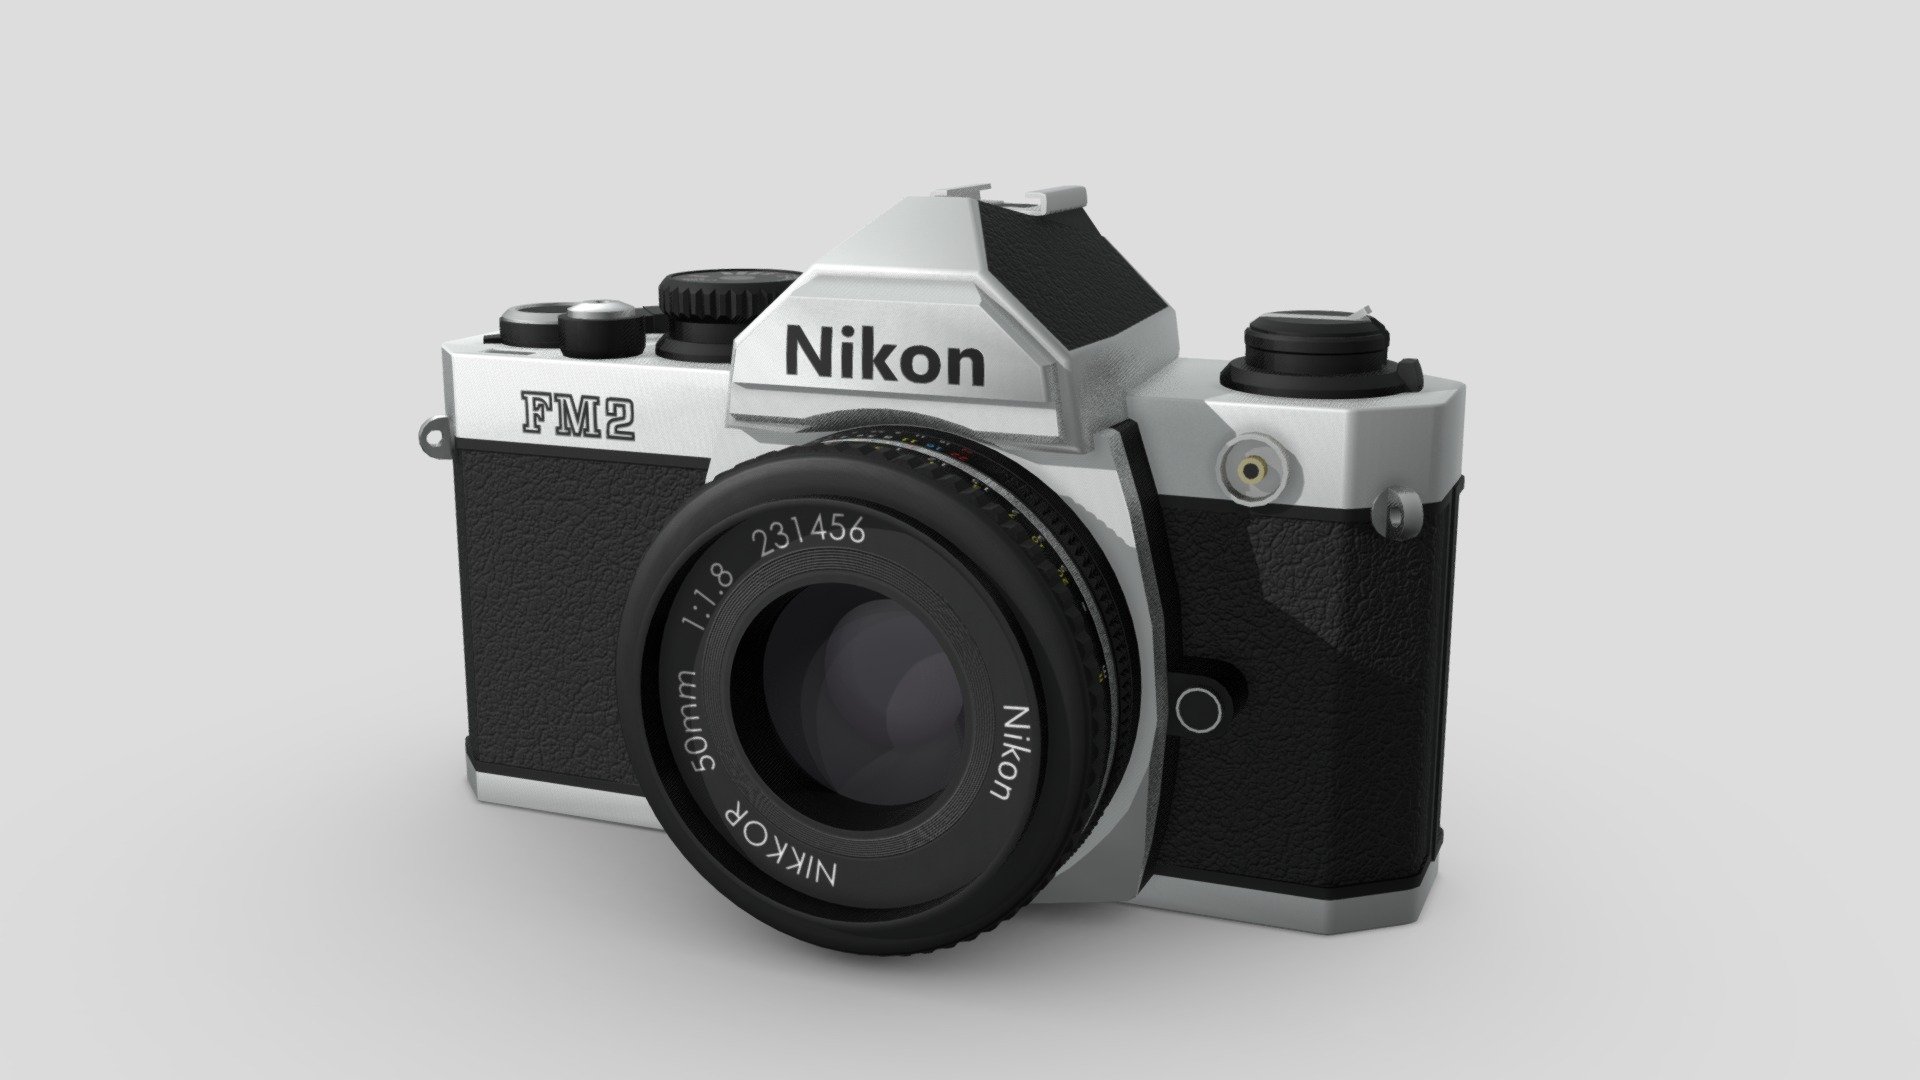 High-poly model of a vintage Nikon FM2n film SLR from the 1980s. Modelled in Blender. All materials have been baked into albedo/roughness/metallic/oppacity maps. The texture resolution is 4k 3d model